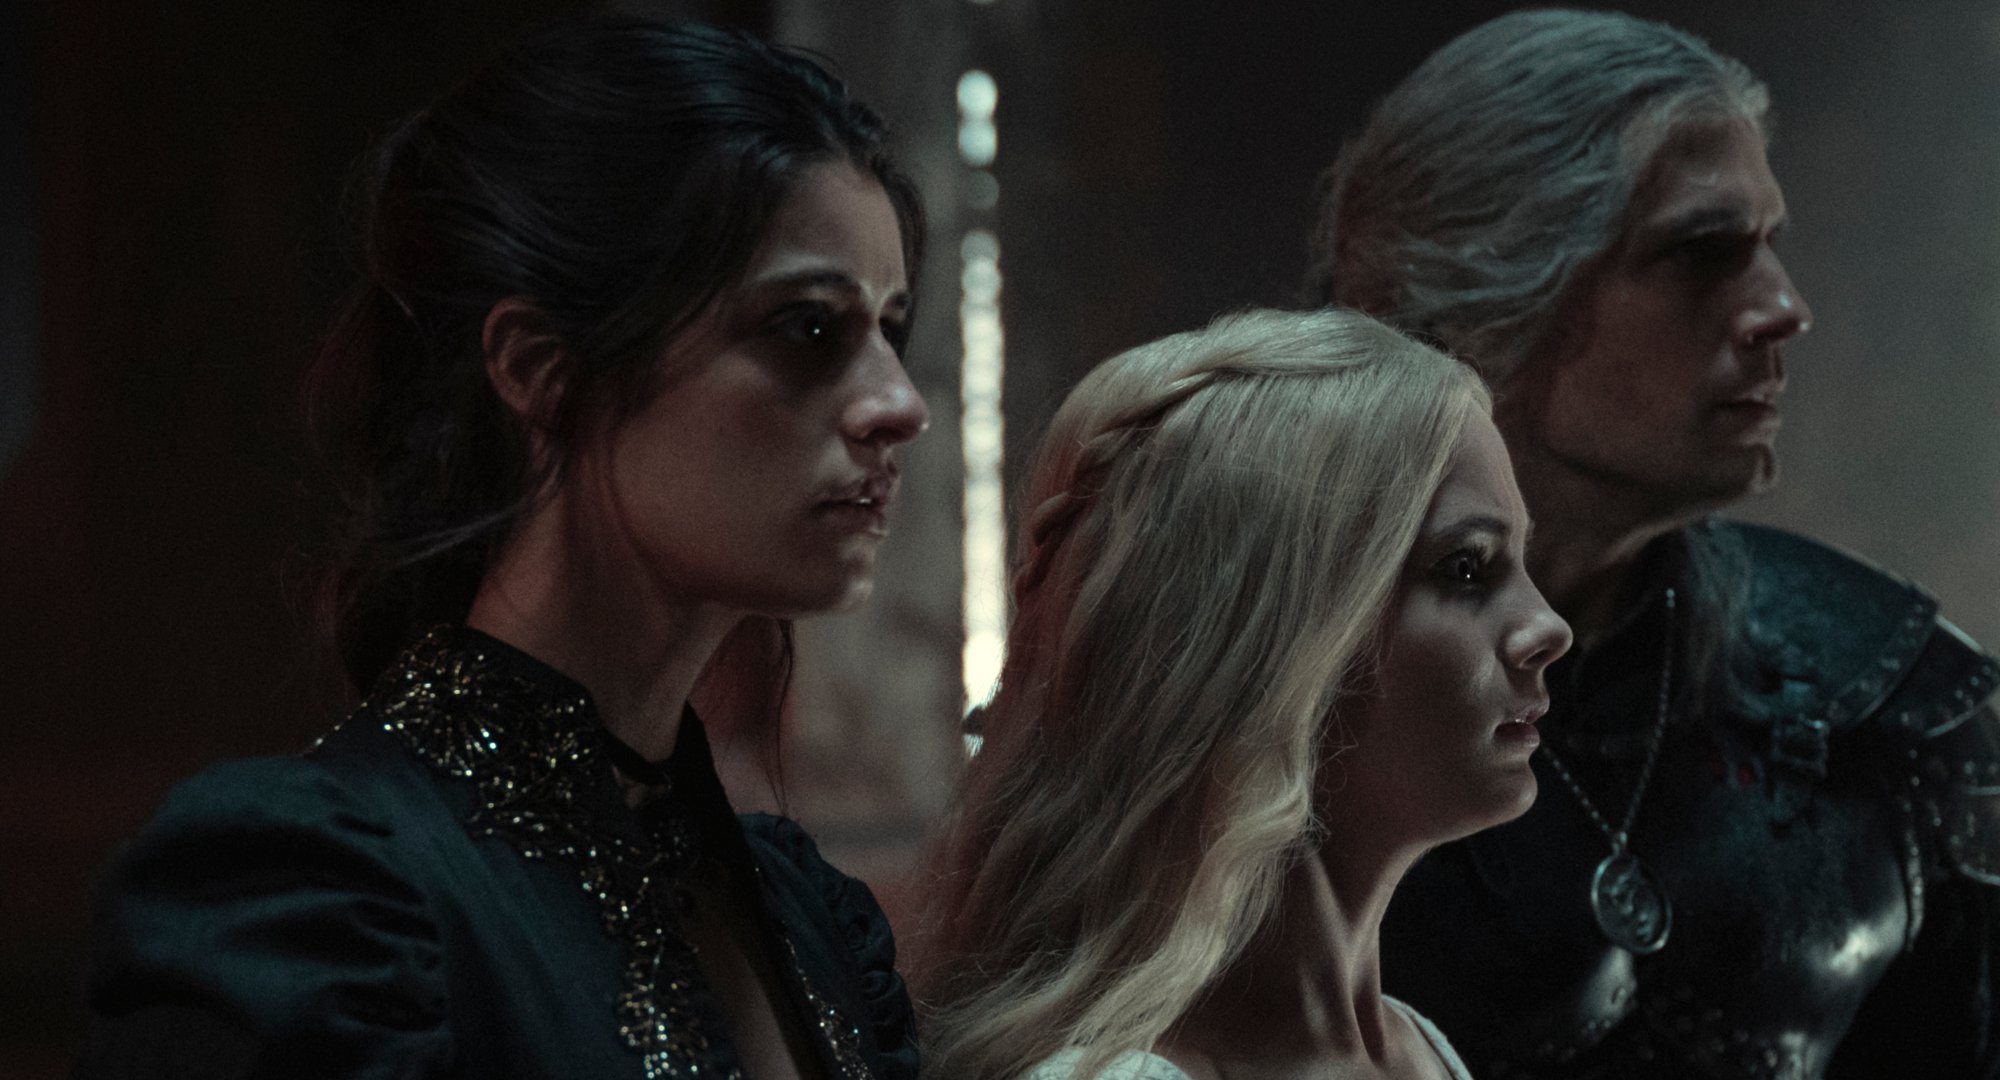 Yennefer, Ciri, and Geralt in 'The Witcher' Season 2 finale.